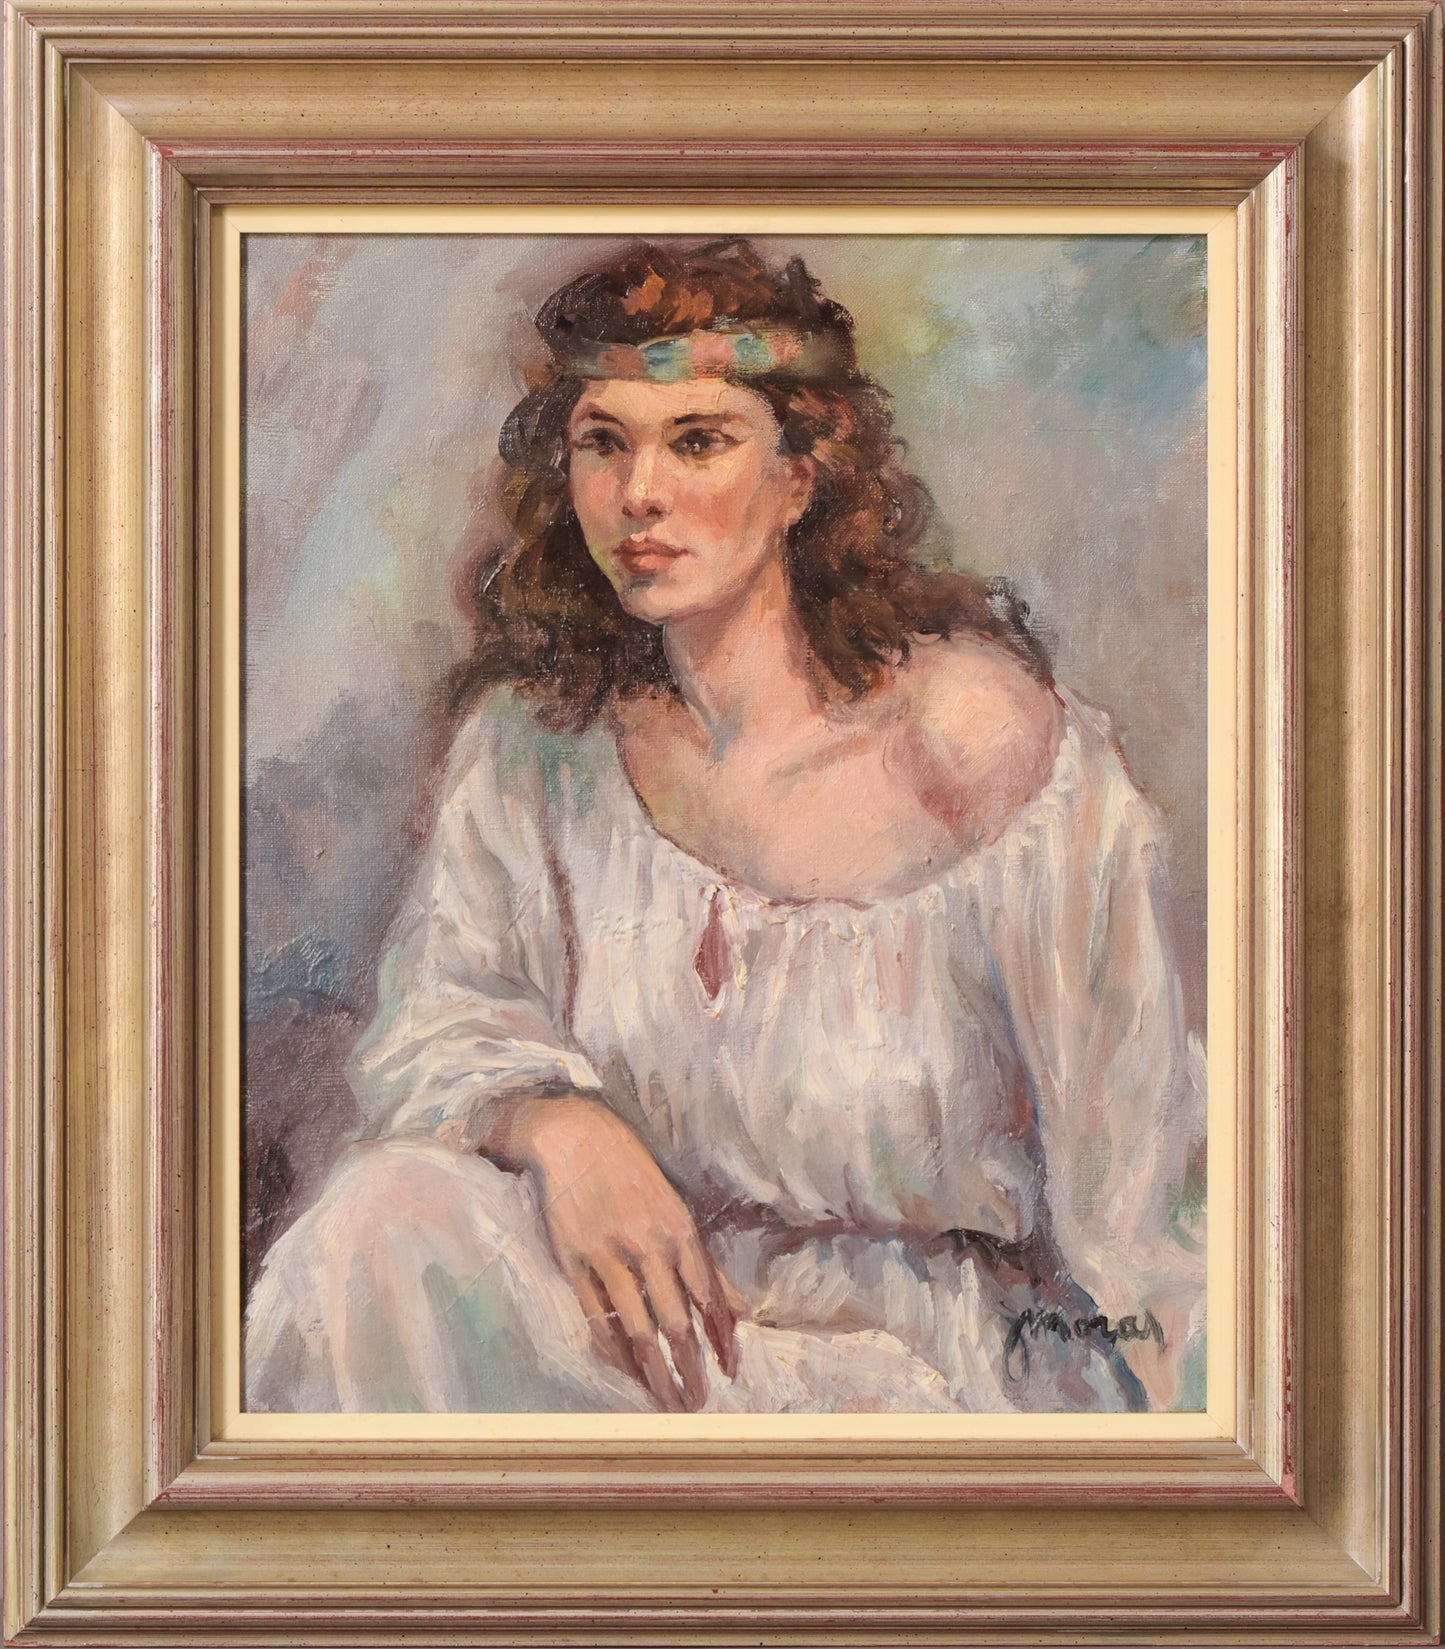 Portrait of a Young Woman in a White Dress Oil on Canvas